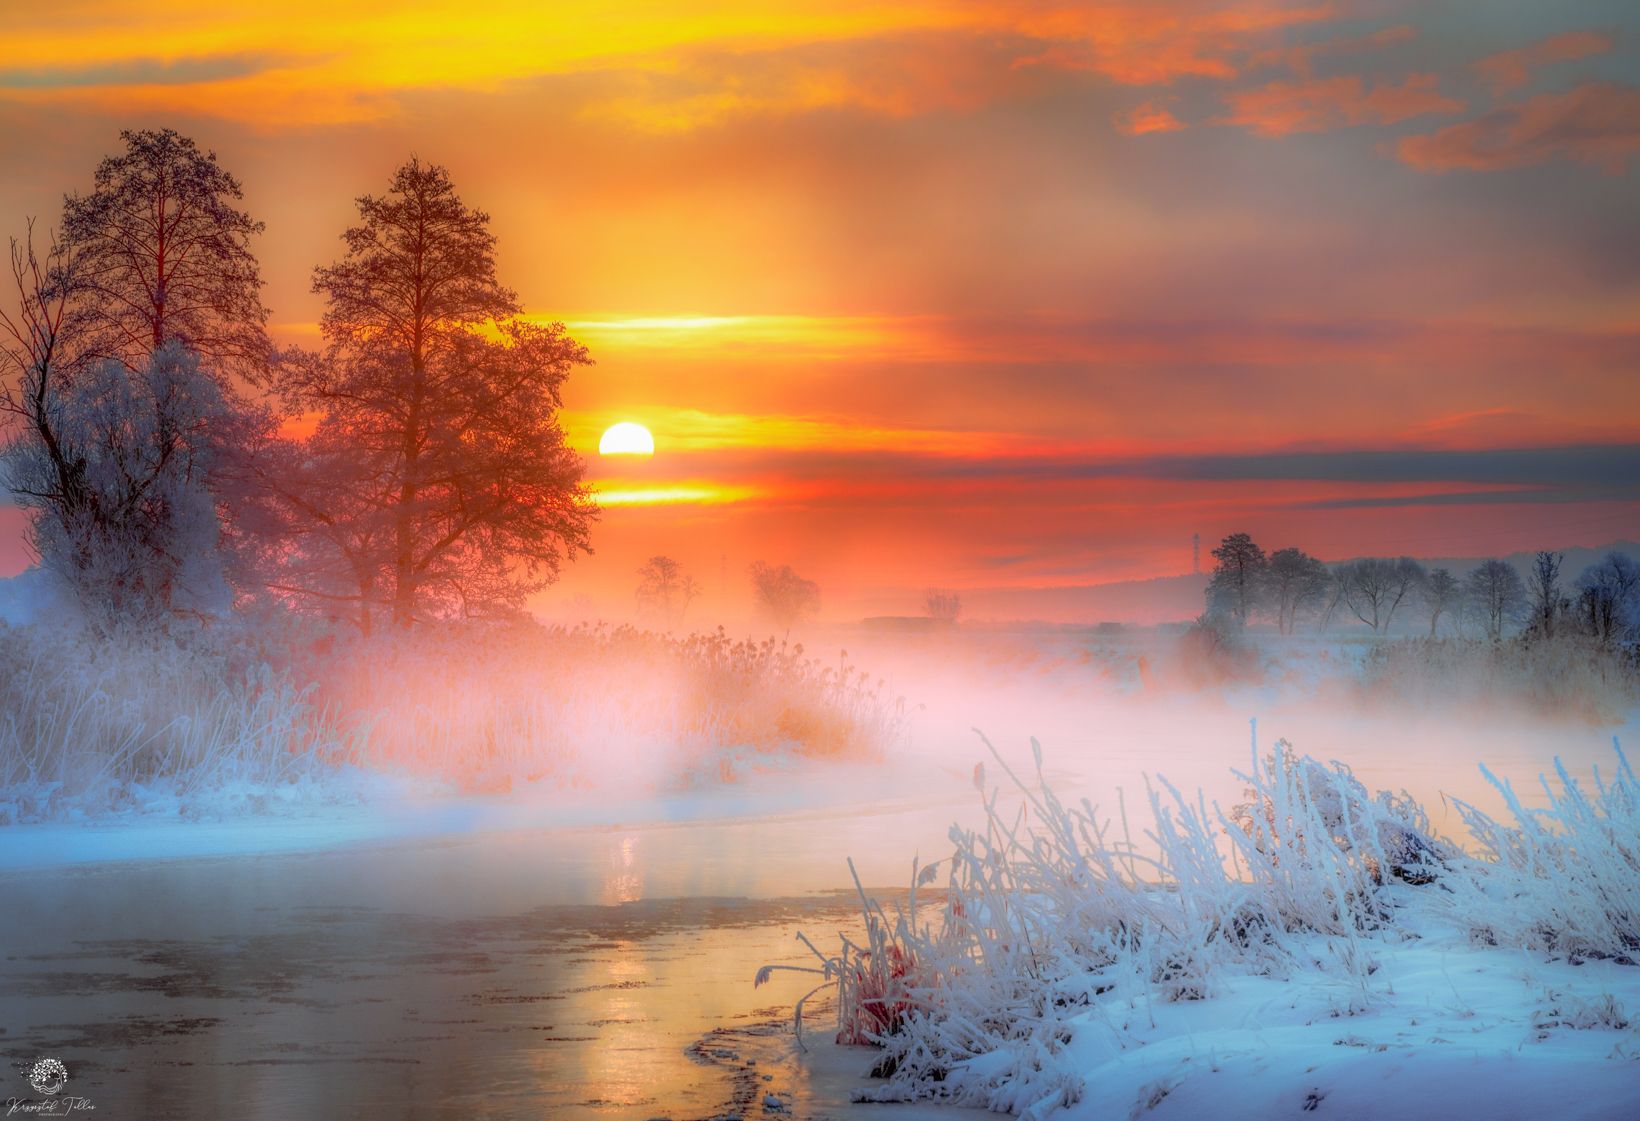 winter  frost  dawn  landscape  nature  river  Gwda  sky  clouds  fog  light  tree sun  daytime dream  water  reflection in the water, Krzysztof Tollas